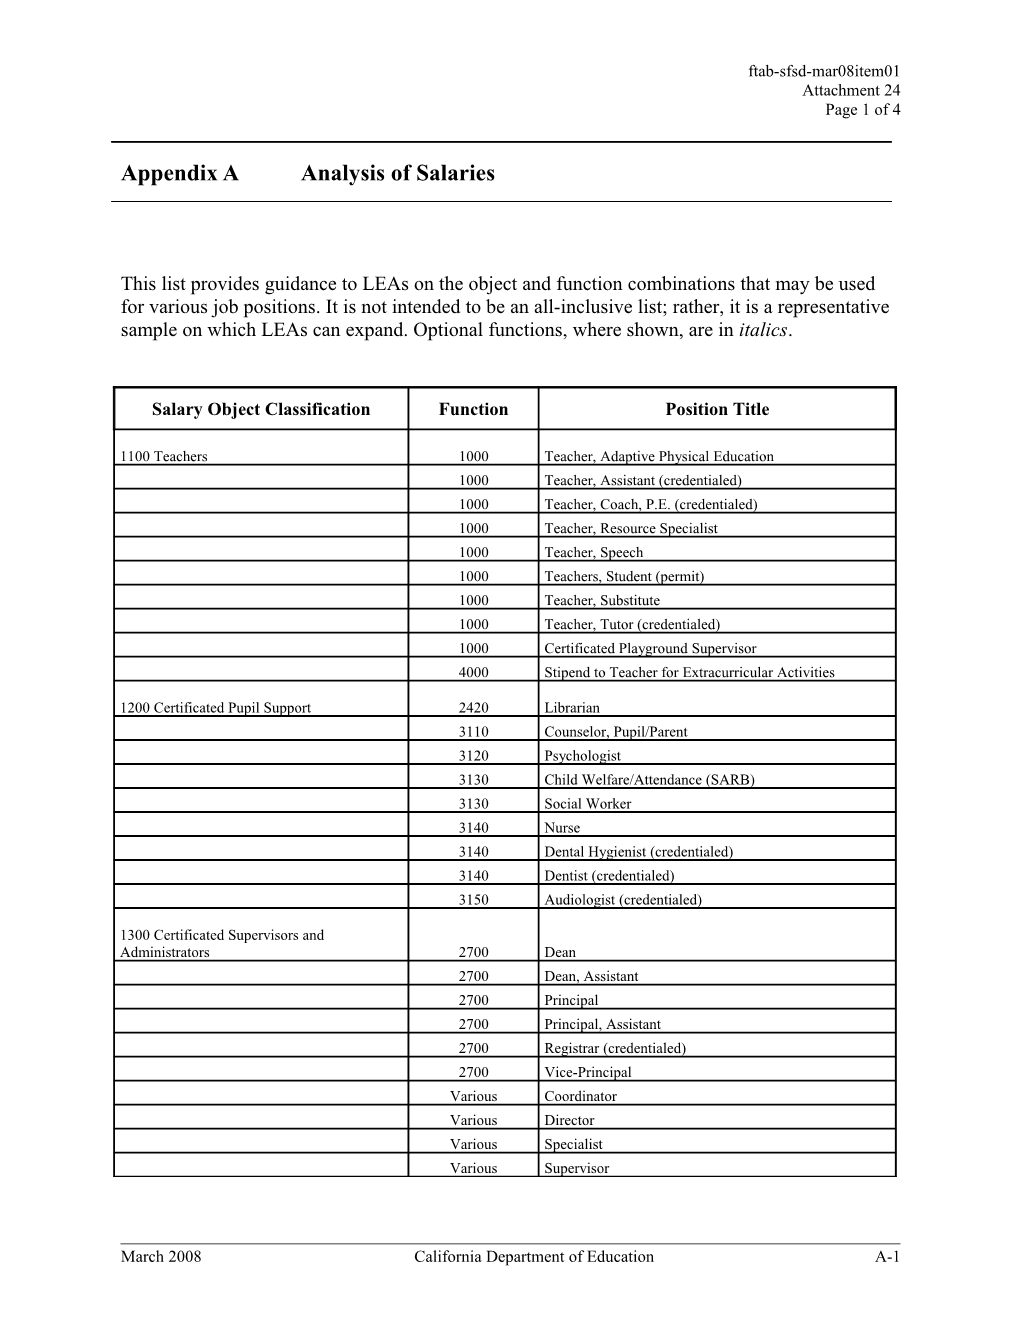 March 2008 Agenda Item 24 Attachment 24 - Meeting Agendas (CA State Board of Education)